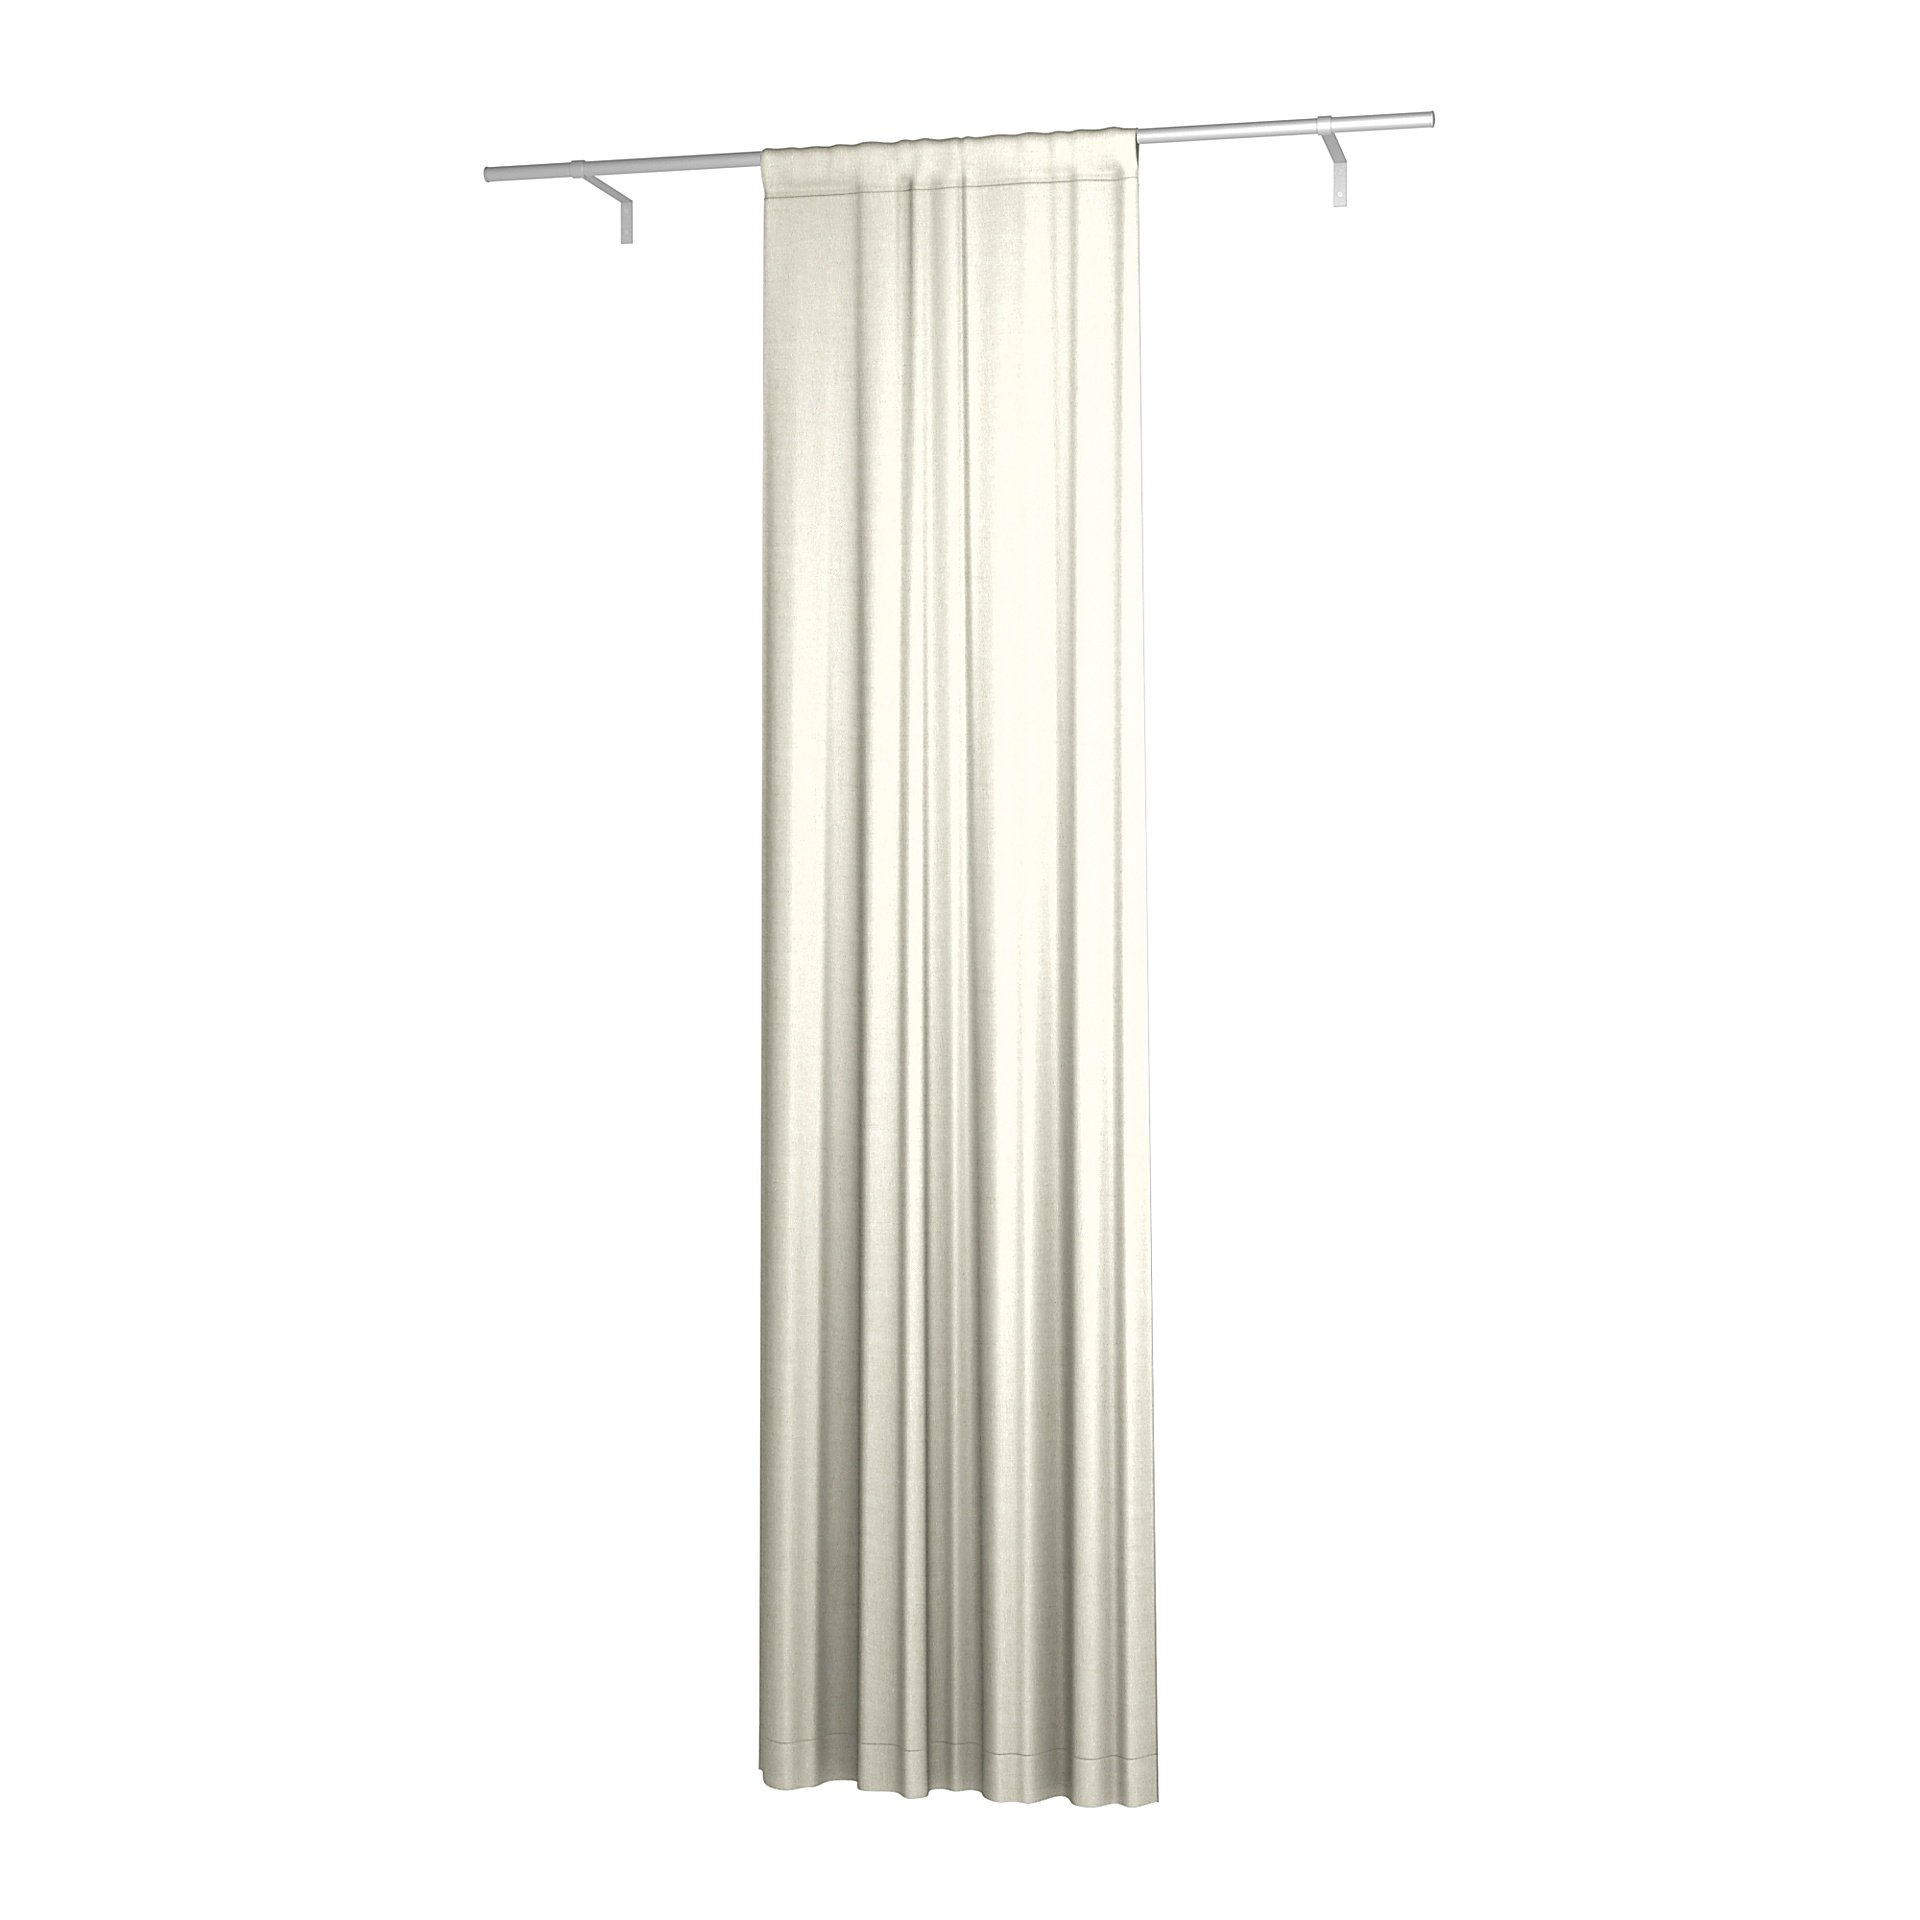 Single Width Curtain Panel with Tunnel/Creaseband, Lined, 250 cm, Natural, Linen - Bemz